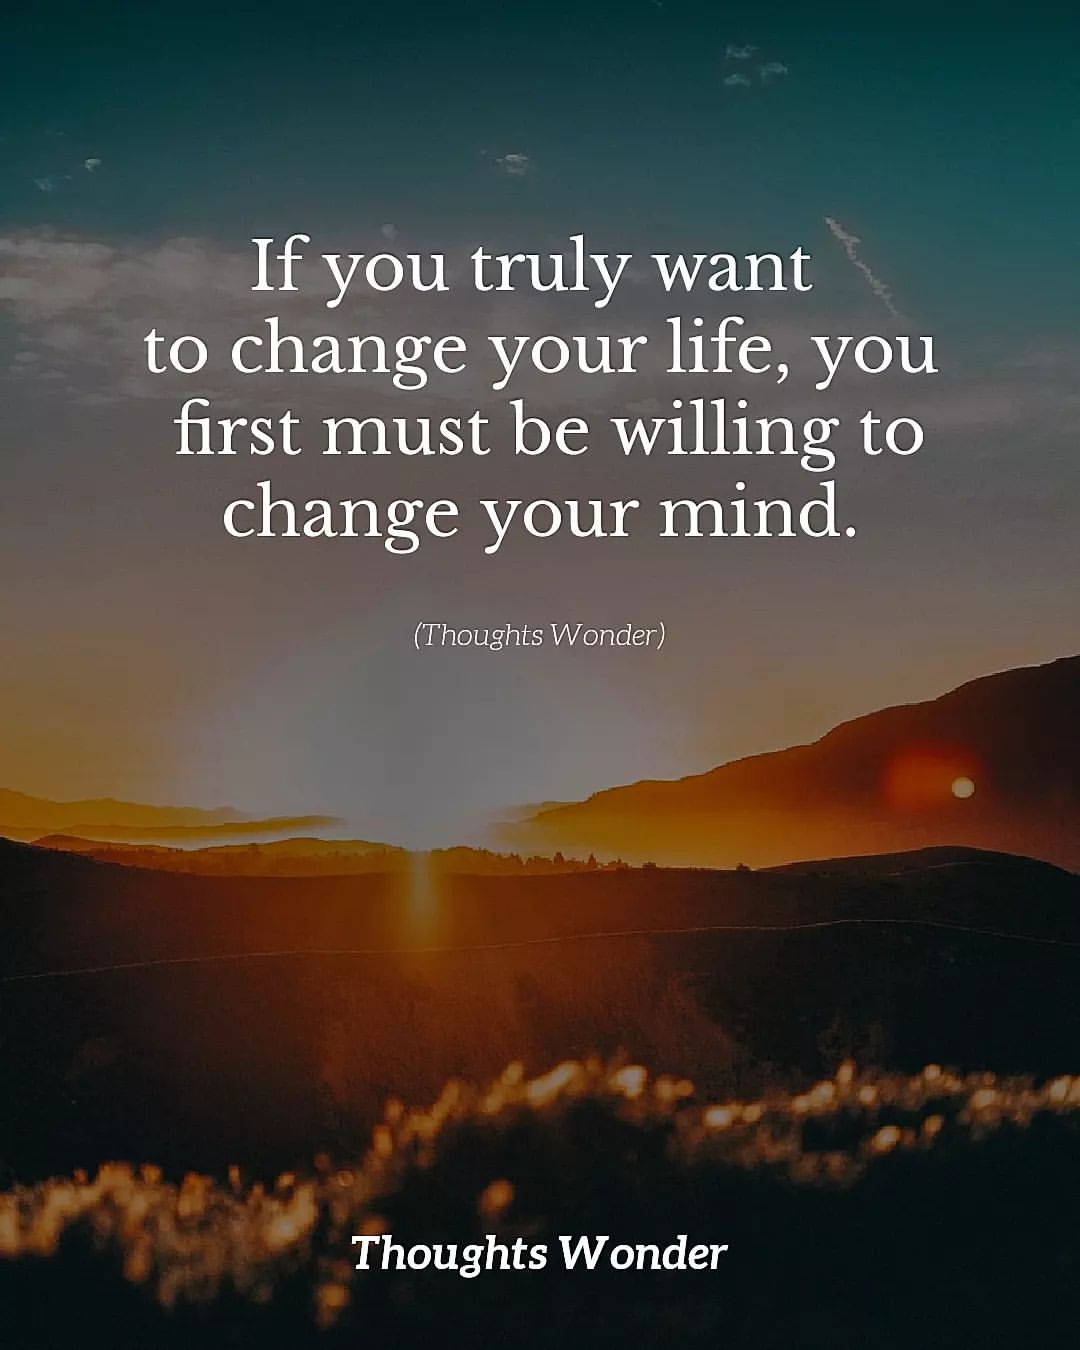 If you truly want to change your life, you first must be willing to change your mind.